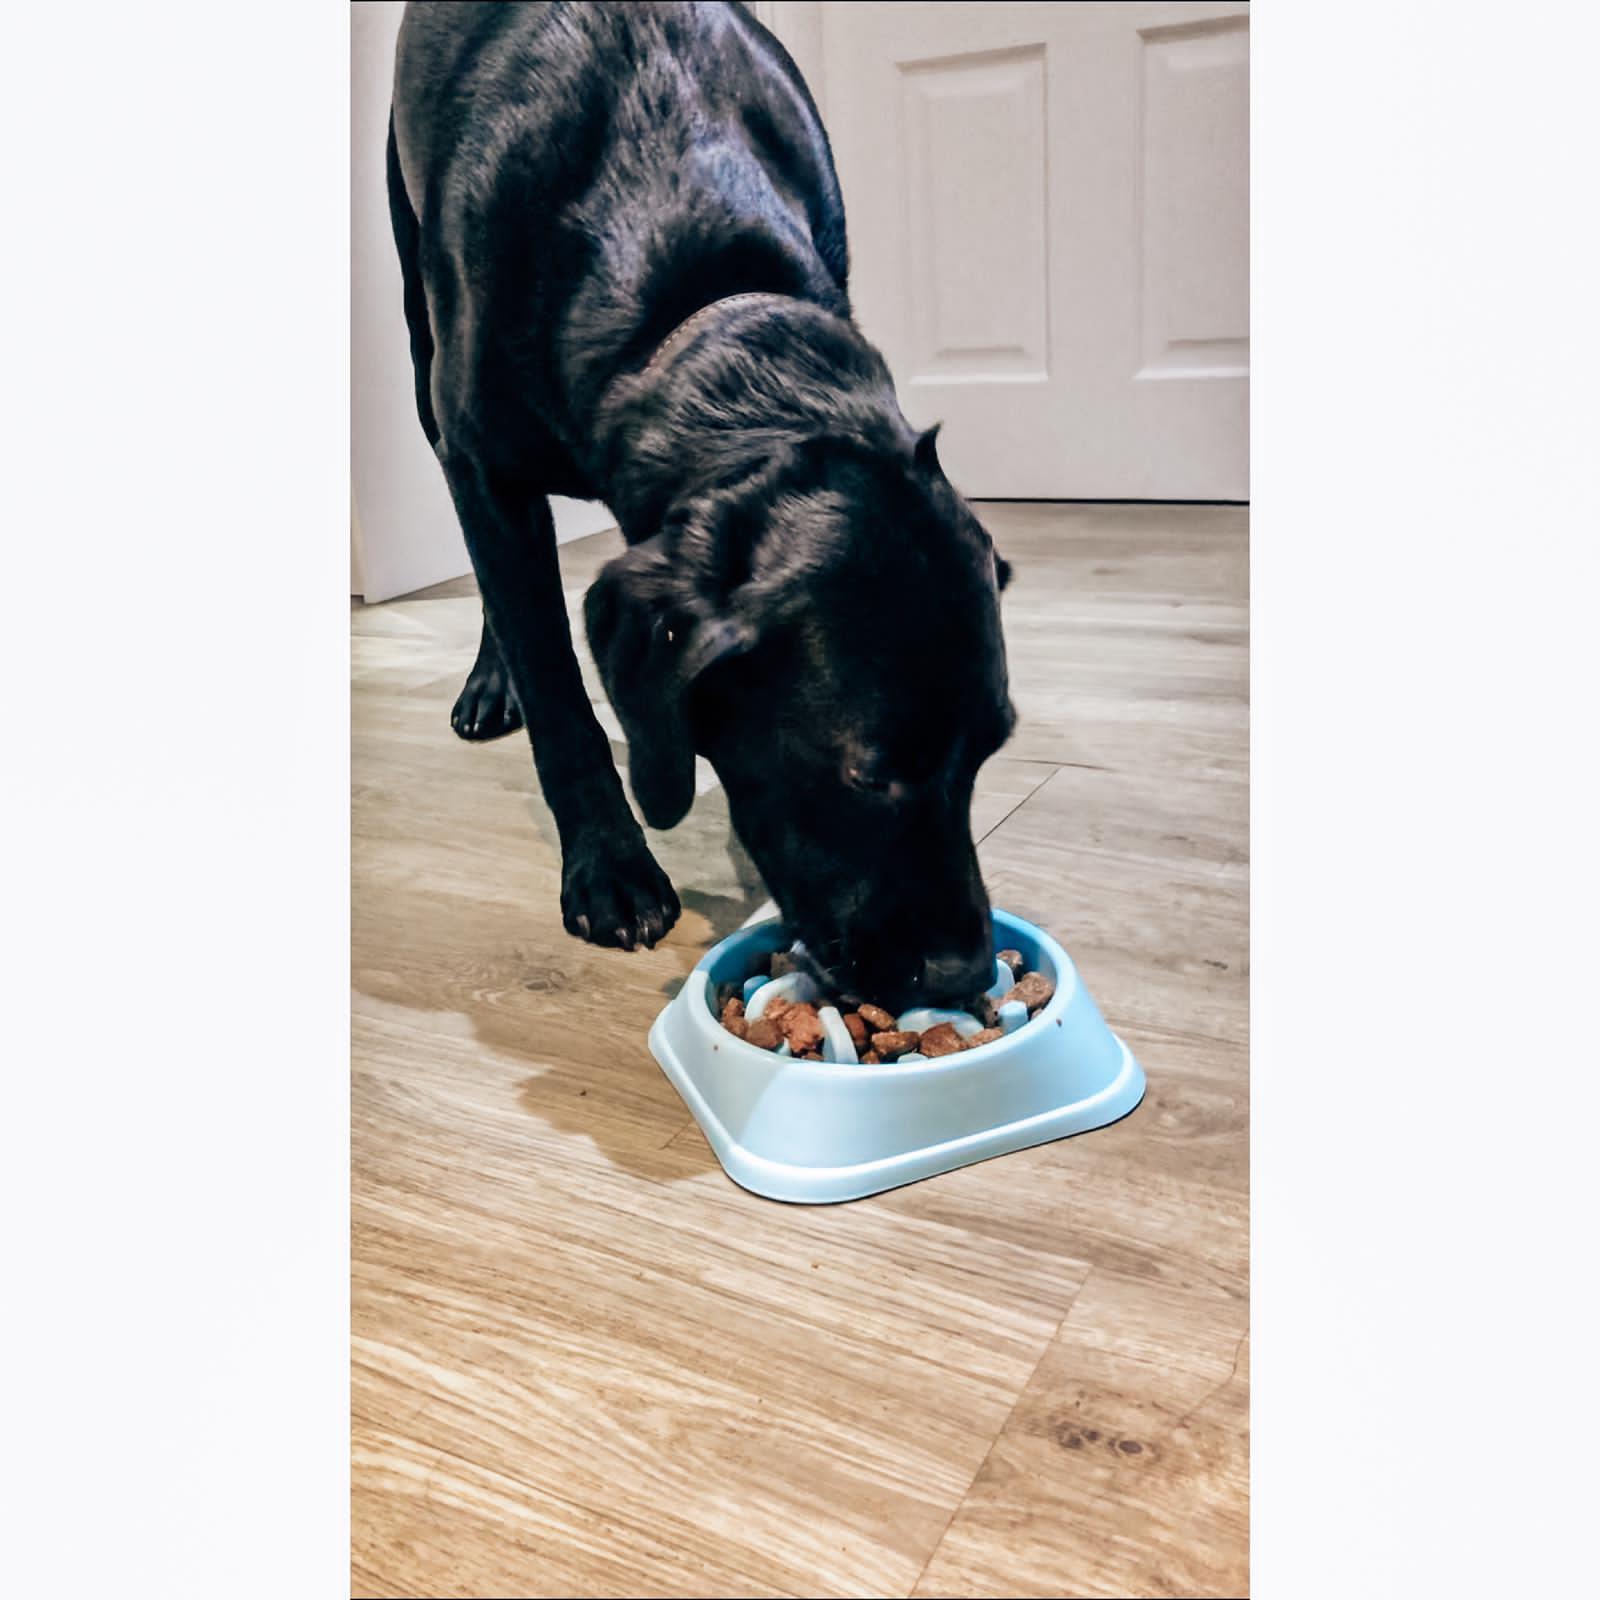 Black lab eating from slow feed bowl